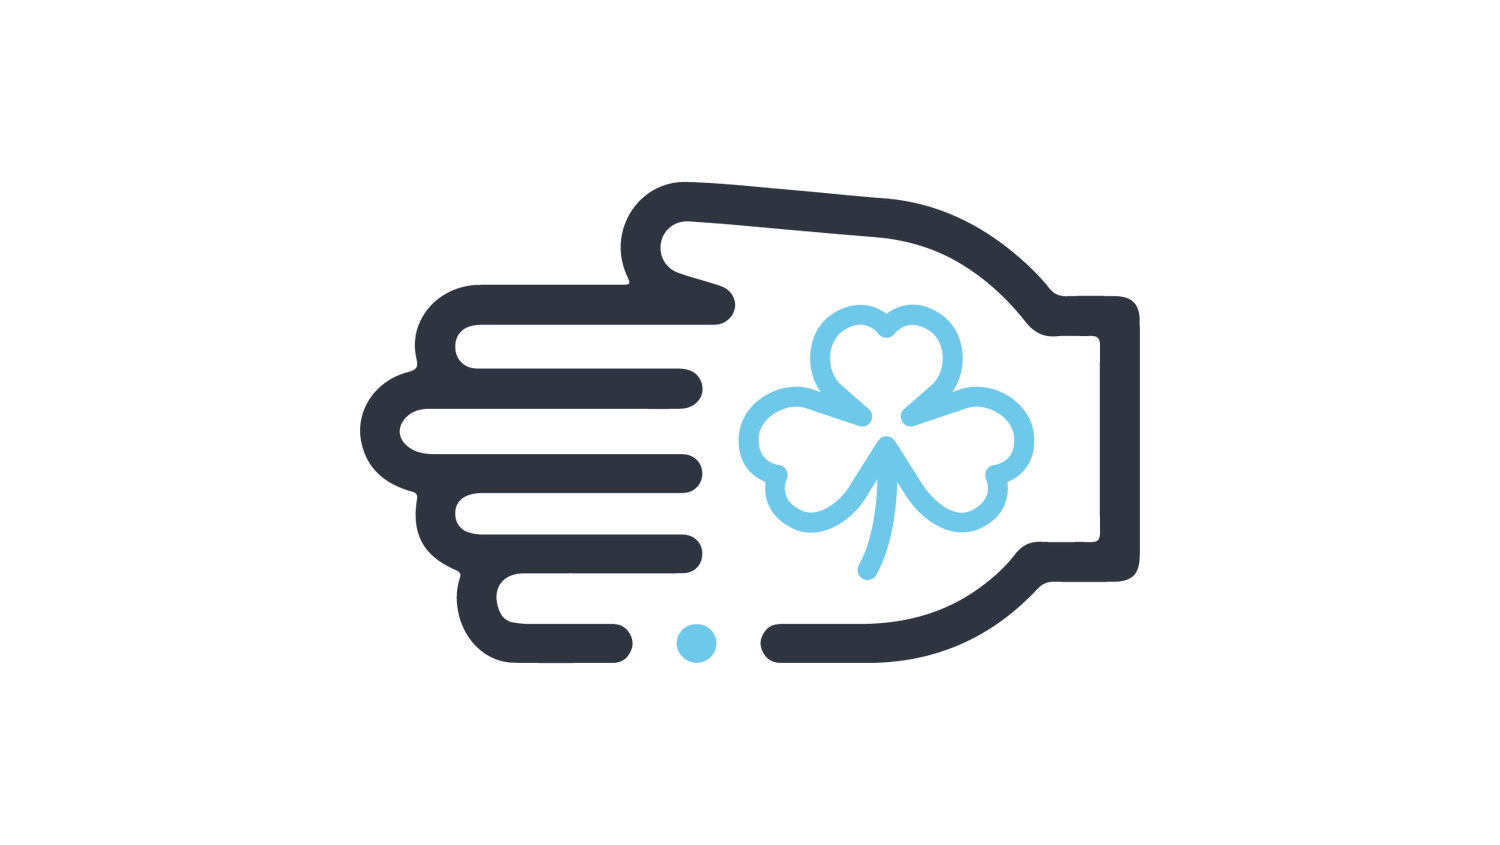 Icon of a hand with a four-leaf clover design located in the centre of the palm